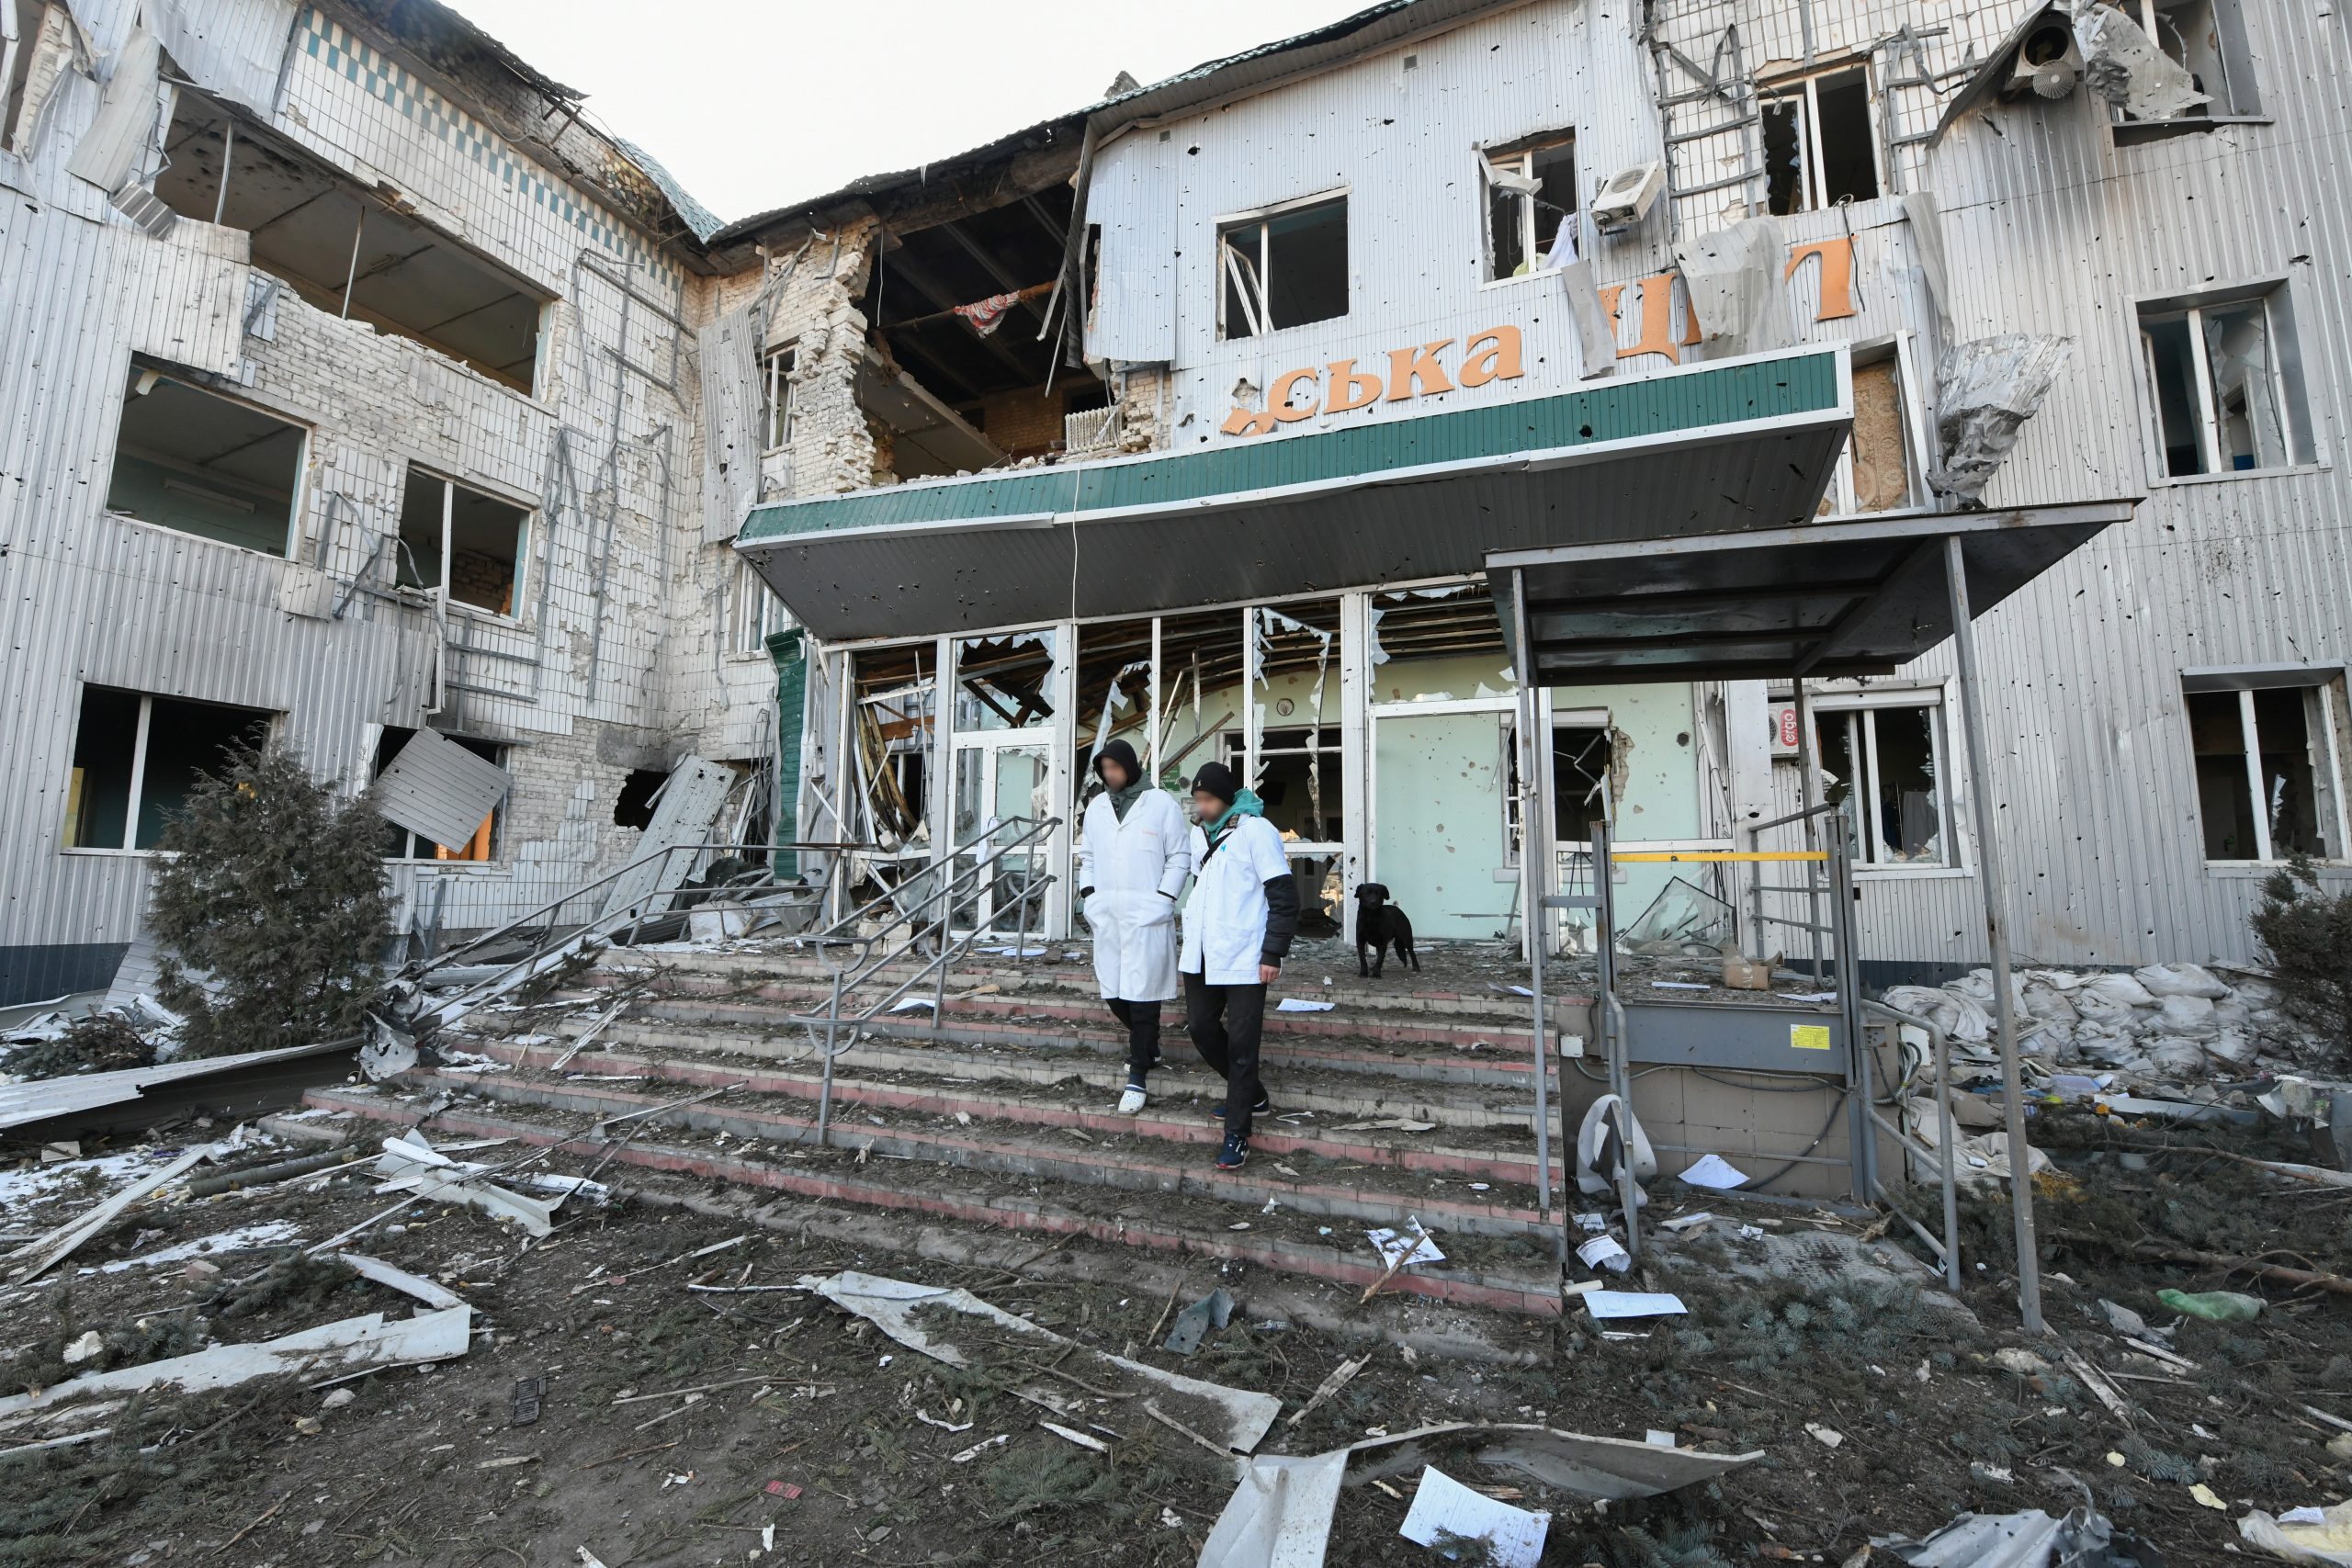 Ukraine has restored over 500 healthcare facilities that were destroyed by Russia